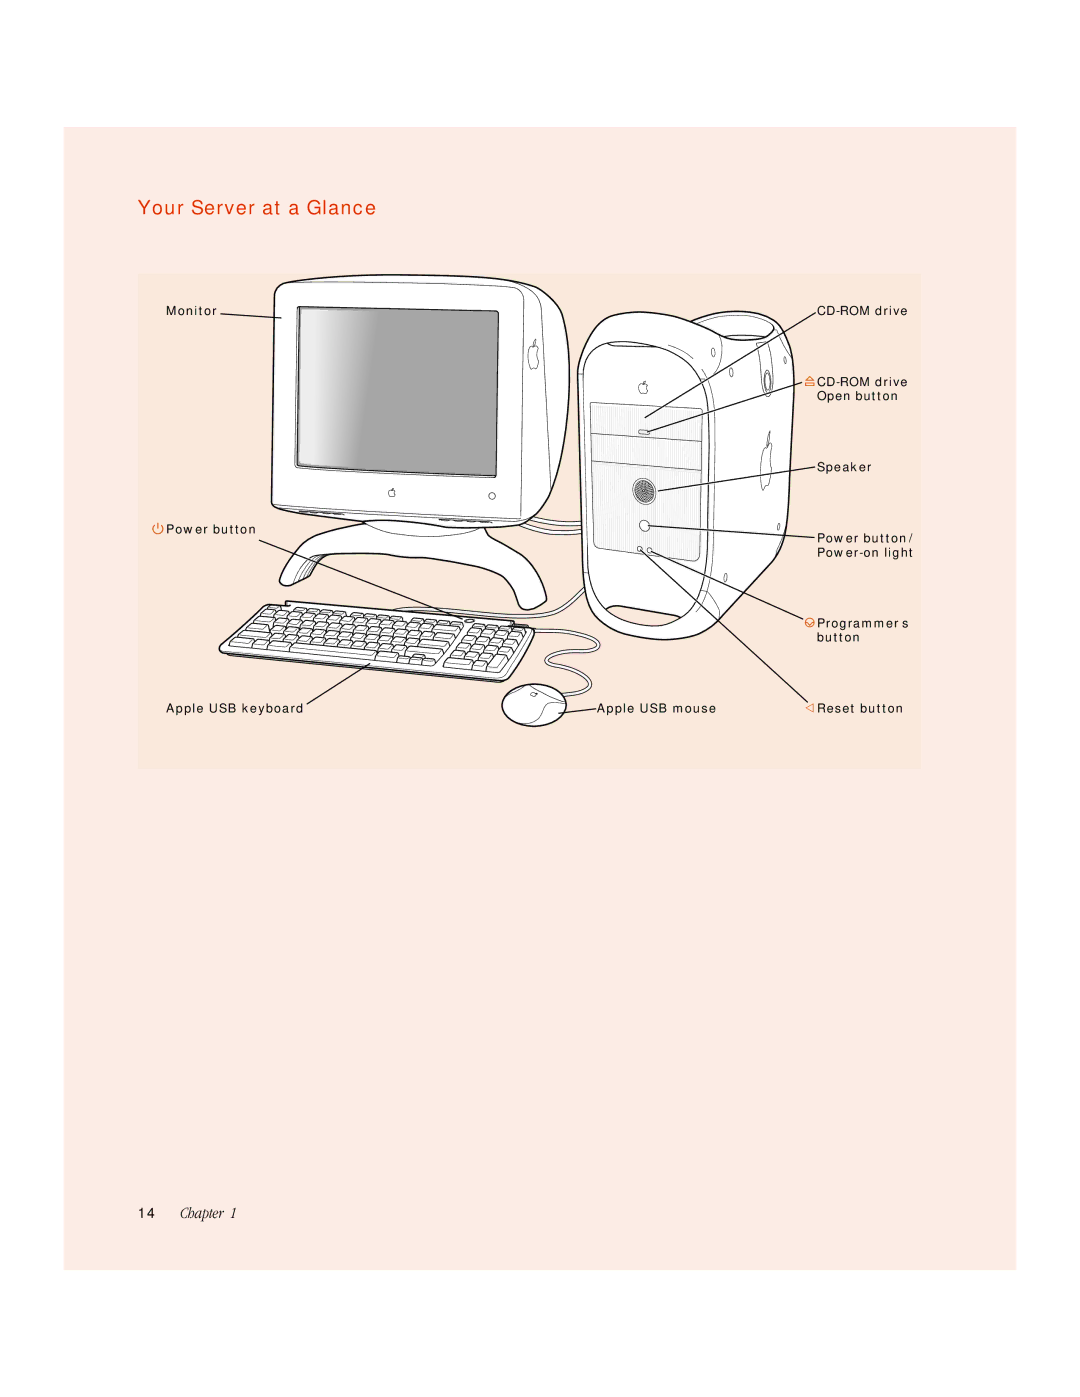 Apple G3 manual Your Server at a Glance 